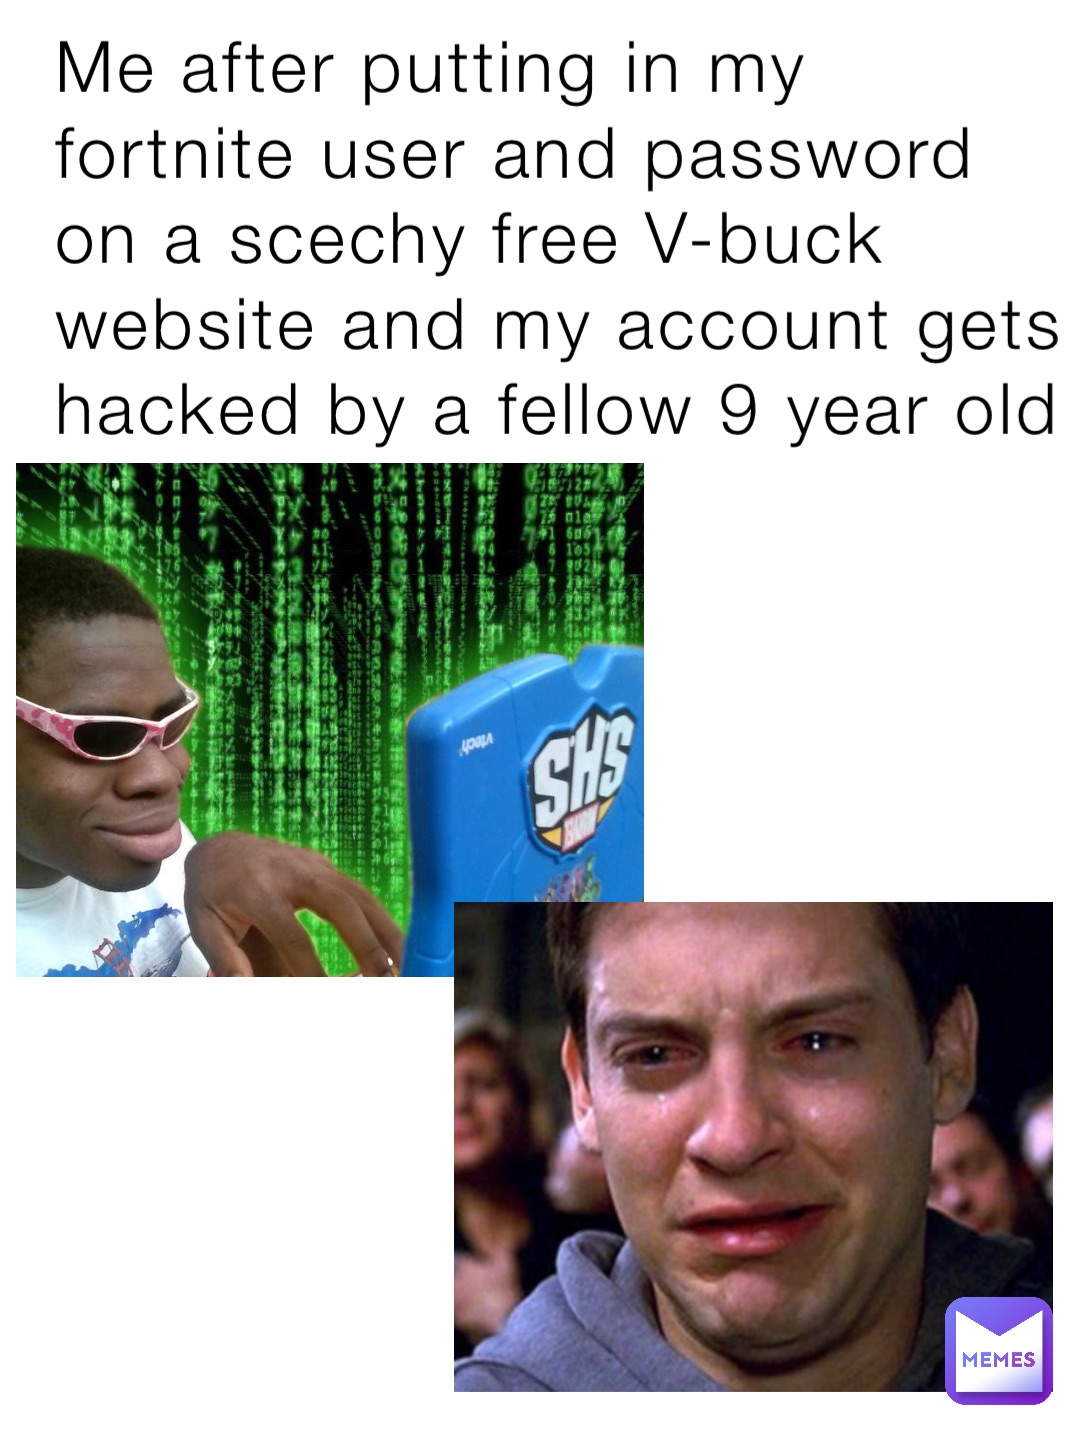 Me after putting in my fortnite user and password on a scechy free V-buck website and my account gets hacked by a fellow 9 year old